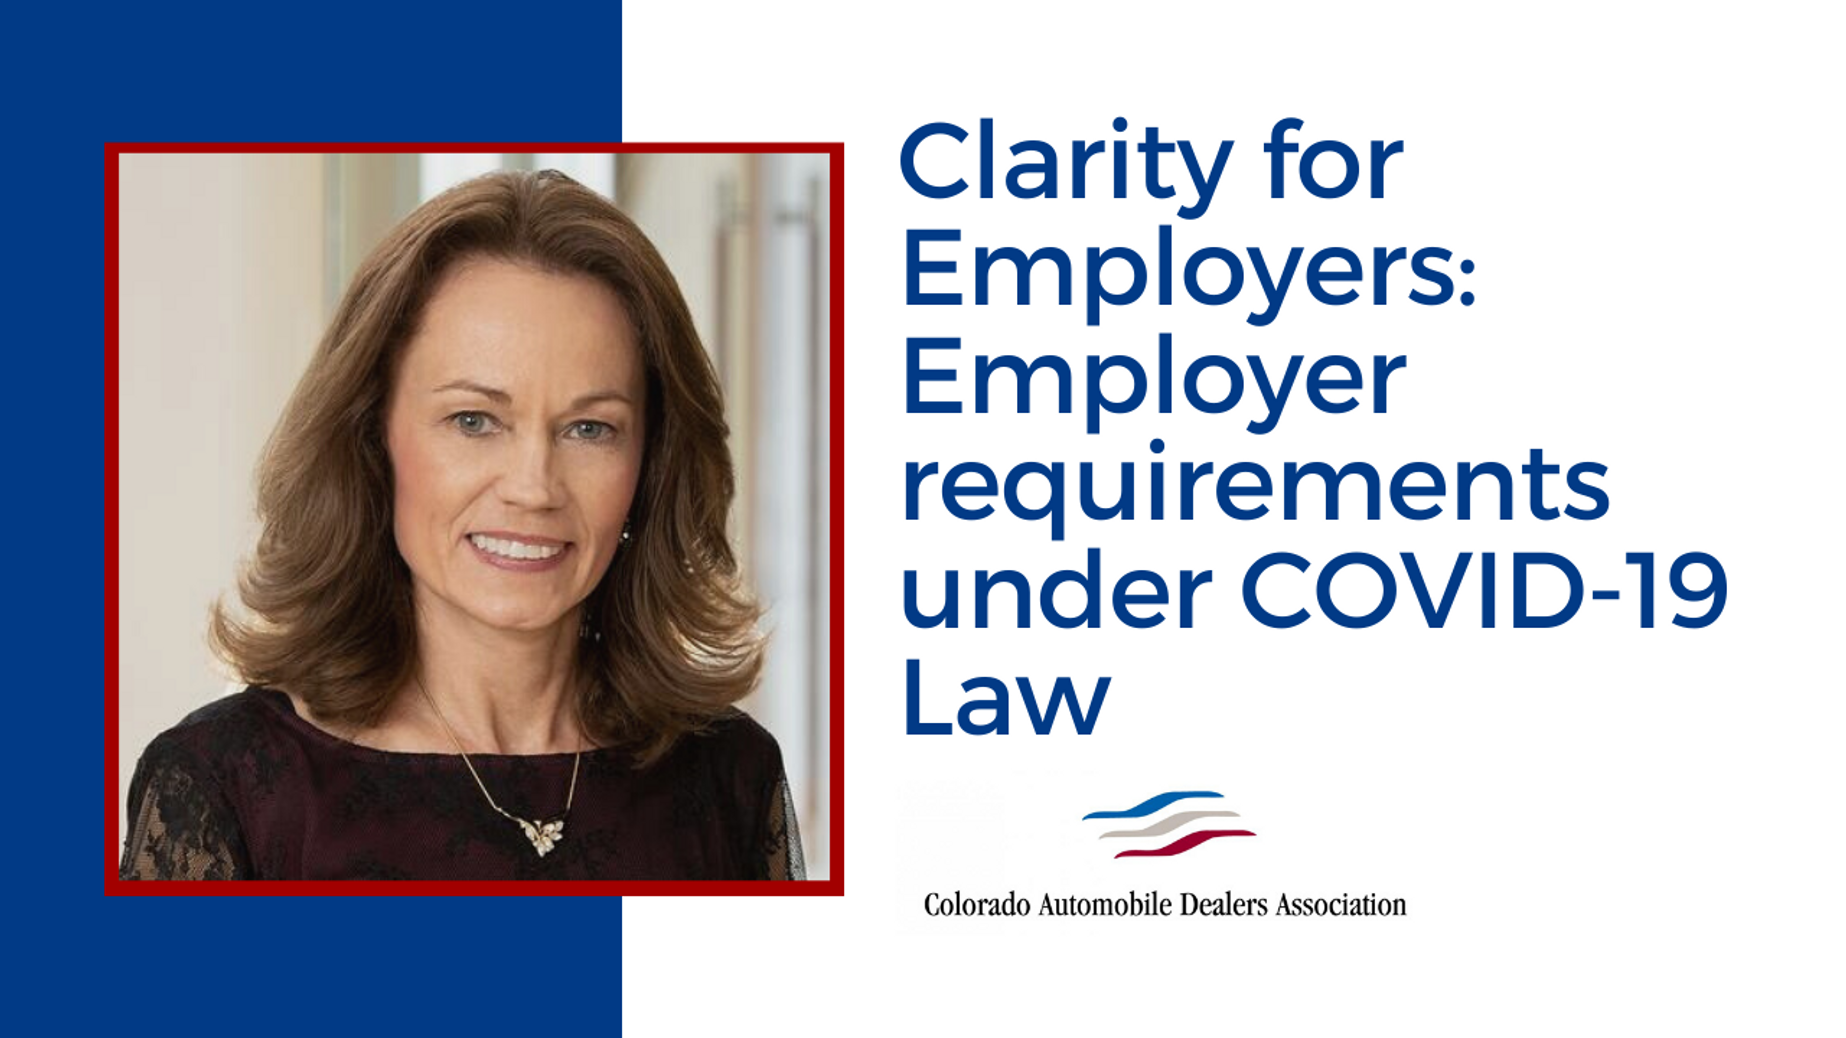 Clarity for Employers: Employer requirements under COVID-19 Law